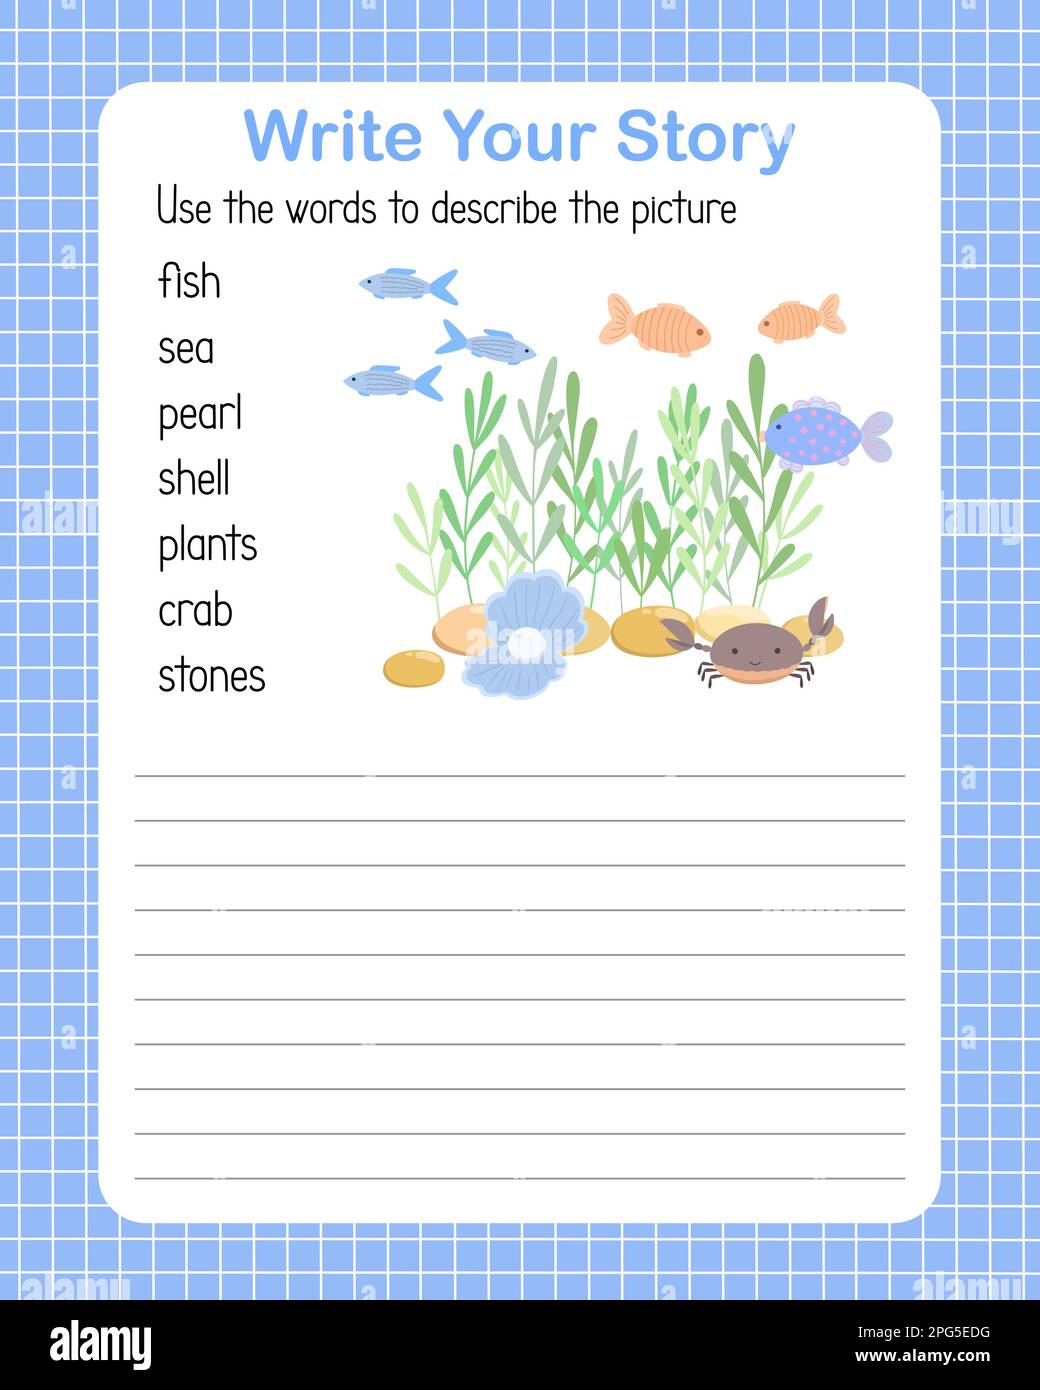 Write a story the English language grammar elementary level for kids, learning concept vector illustration, educational worksheet describe a picture using topical vocabulary words Under the sea Stock Vector